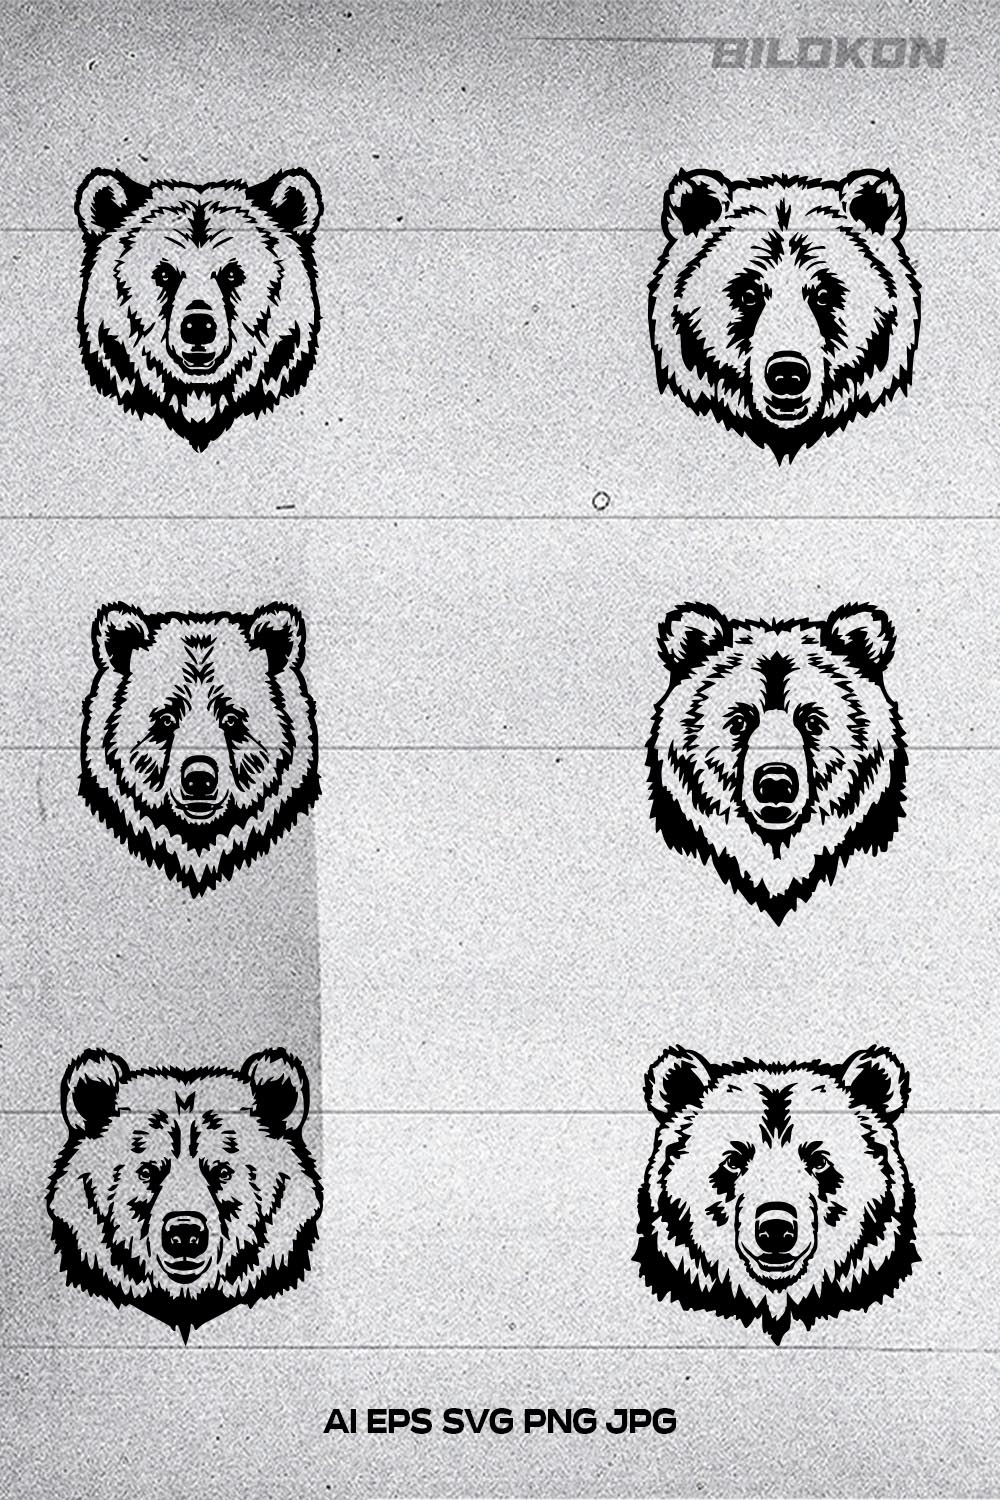 Bear head icon, Grizzly Mascot Hand drawn Emblem, Illustration, SVG, Vector pinterest preview image.